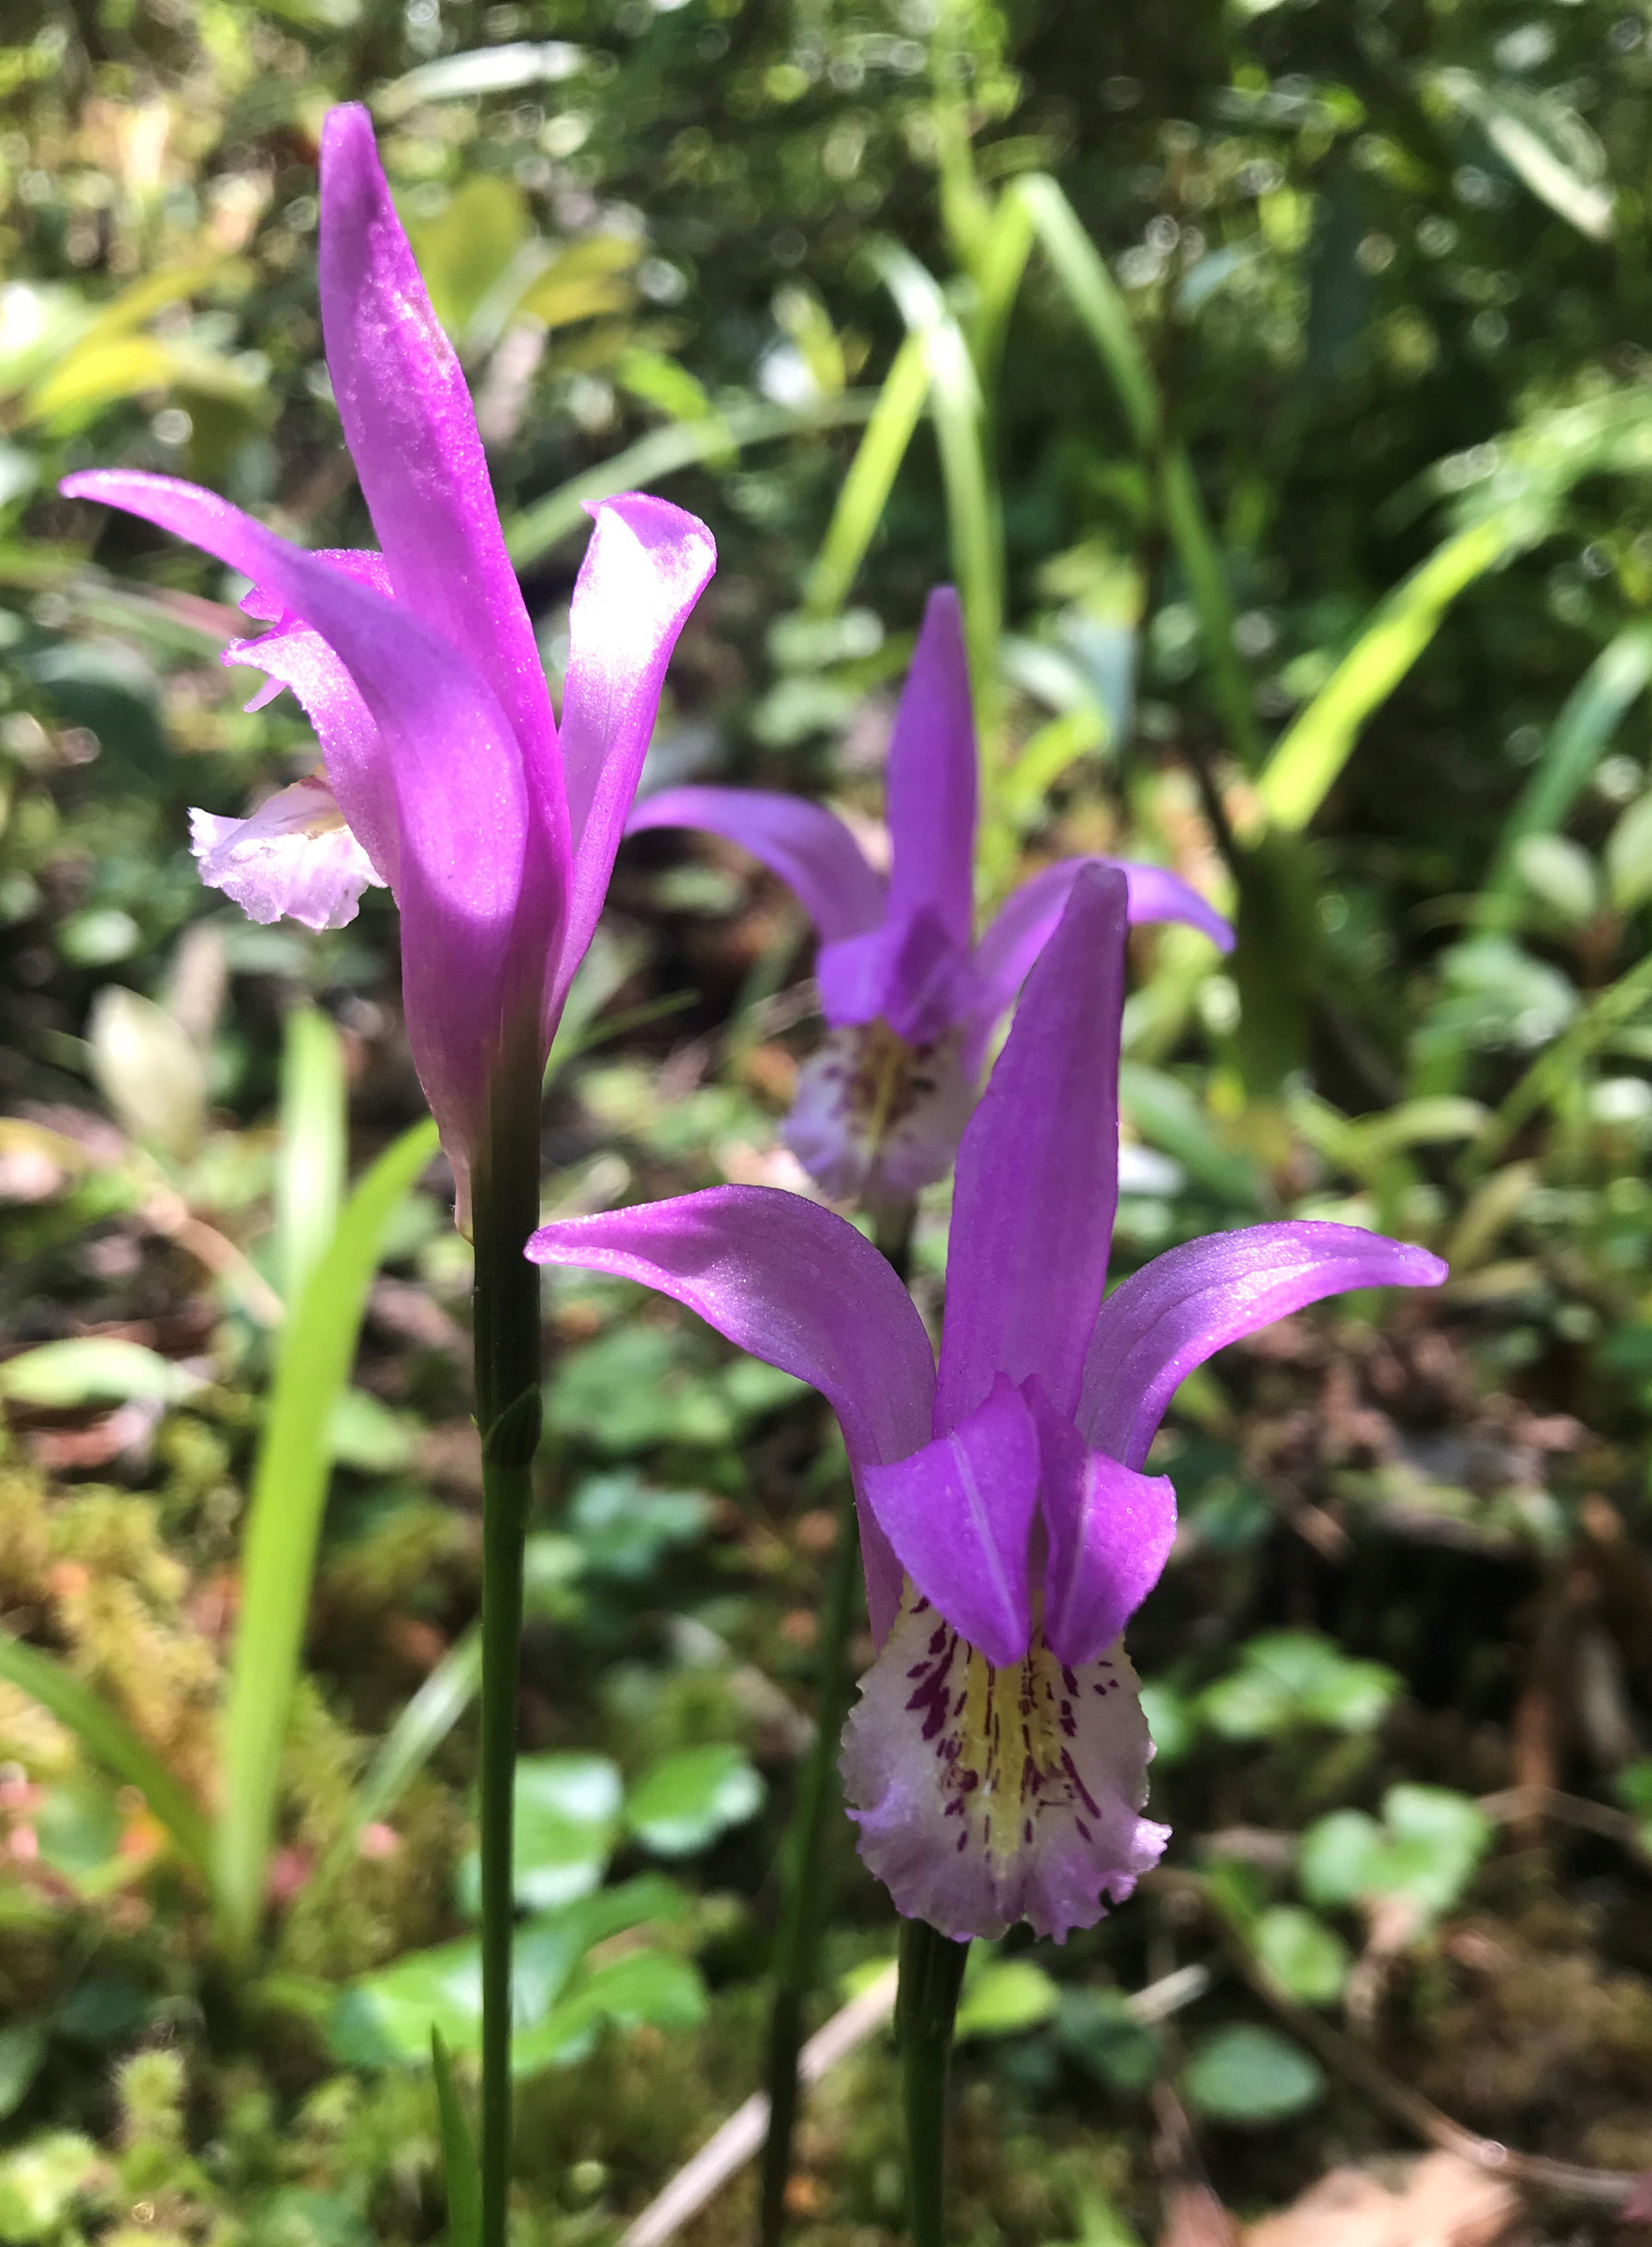 Arethusa bulbosa also known as the Dragon's Mouth orchid is a native plant that the Pennsylvania Department of Conservation and Natural ResourceÕs Bureau of Forestry' Pennsylvania Plant Conservation Network is trying to save.